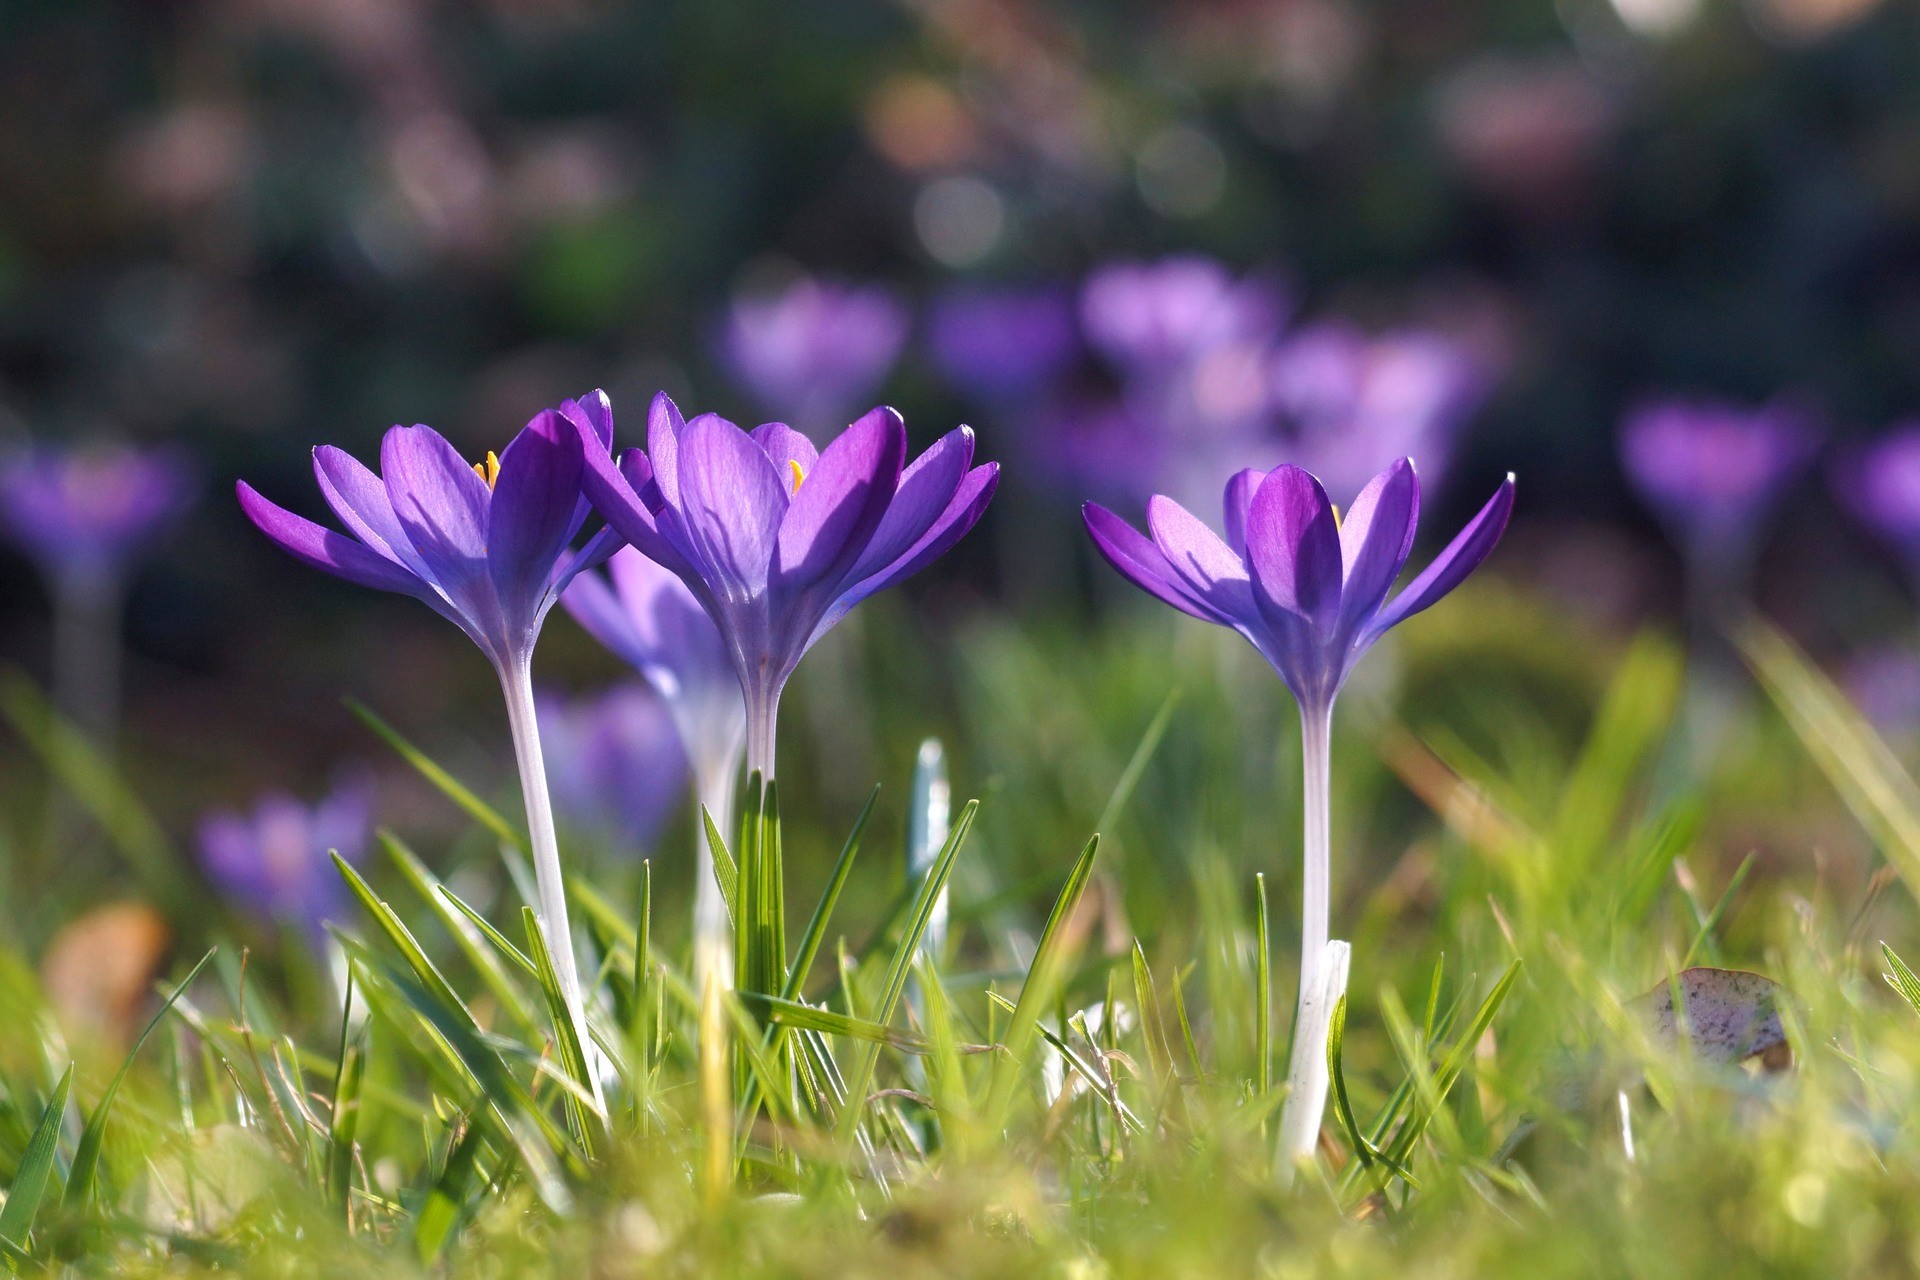 Crocuses at sunset, spring day.